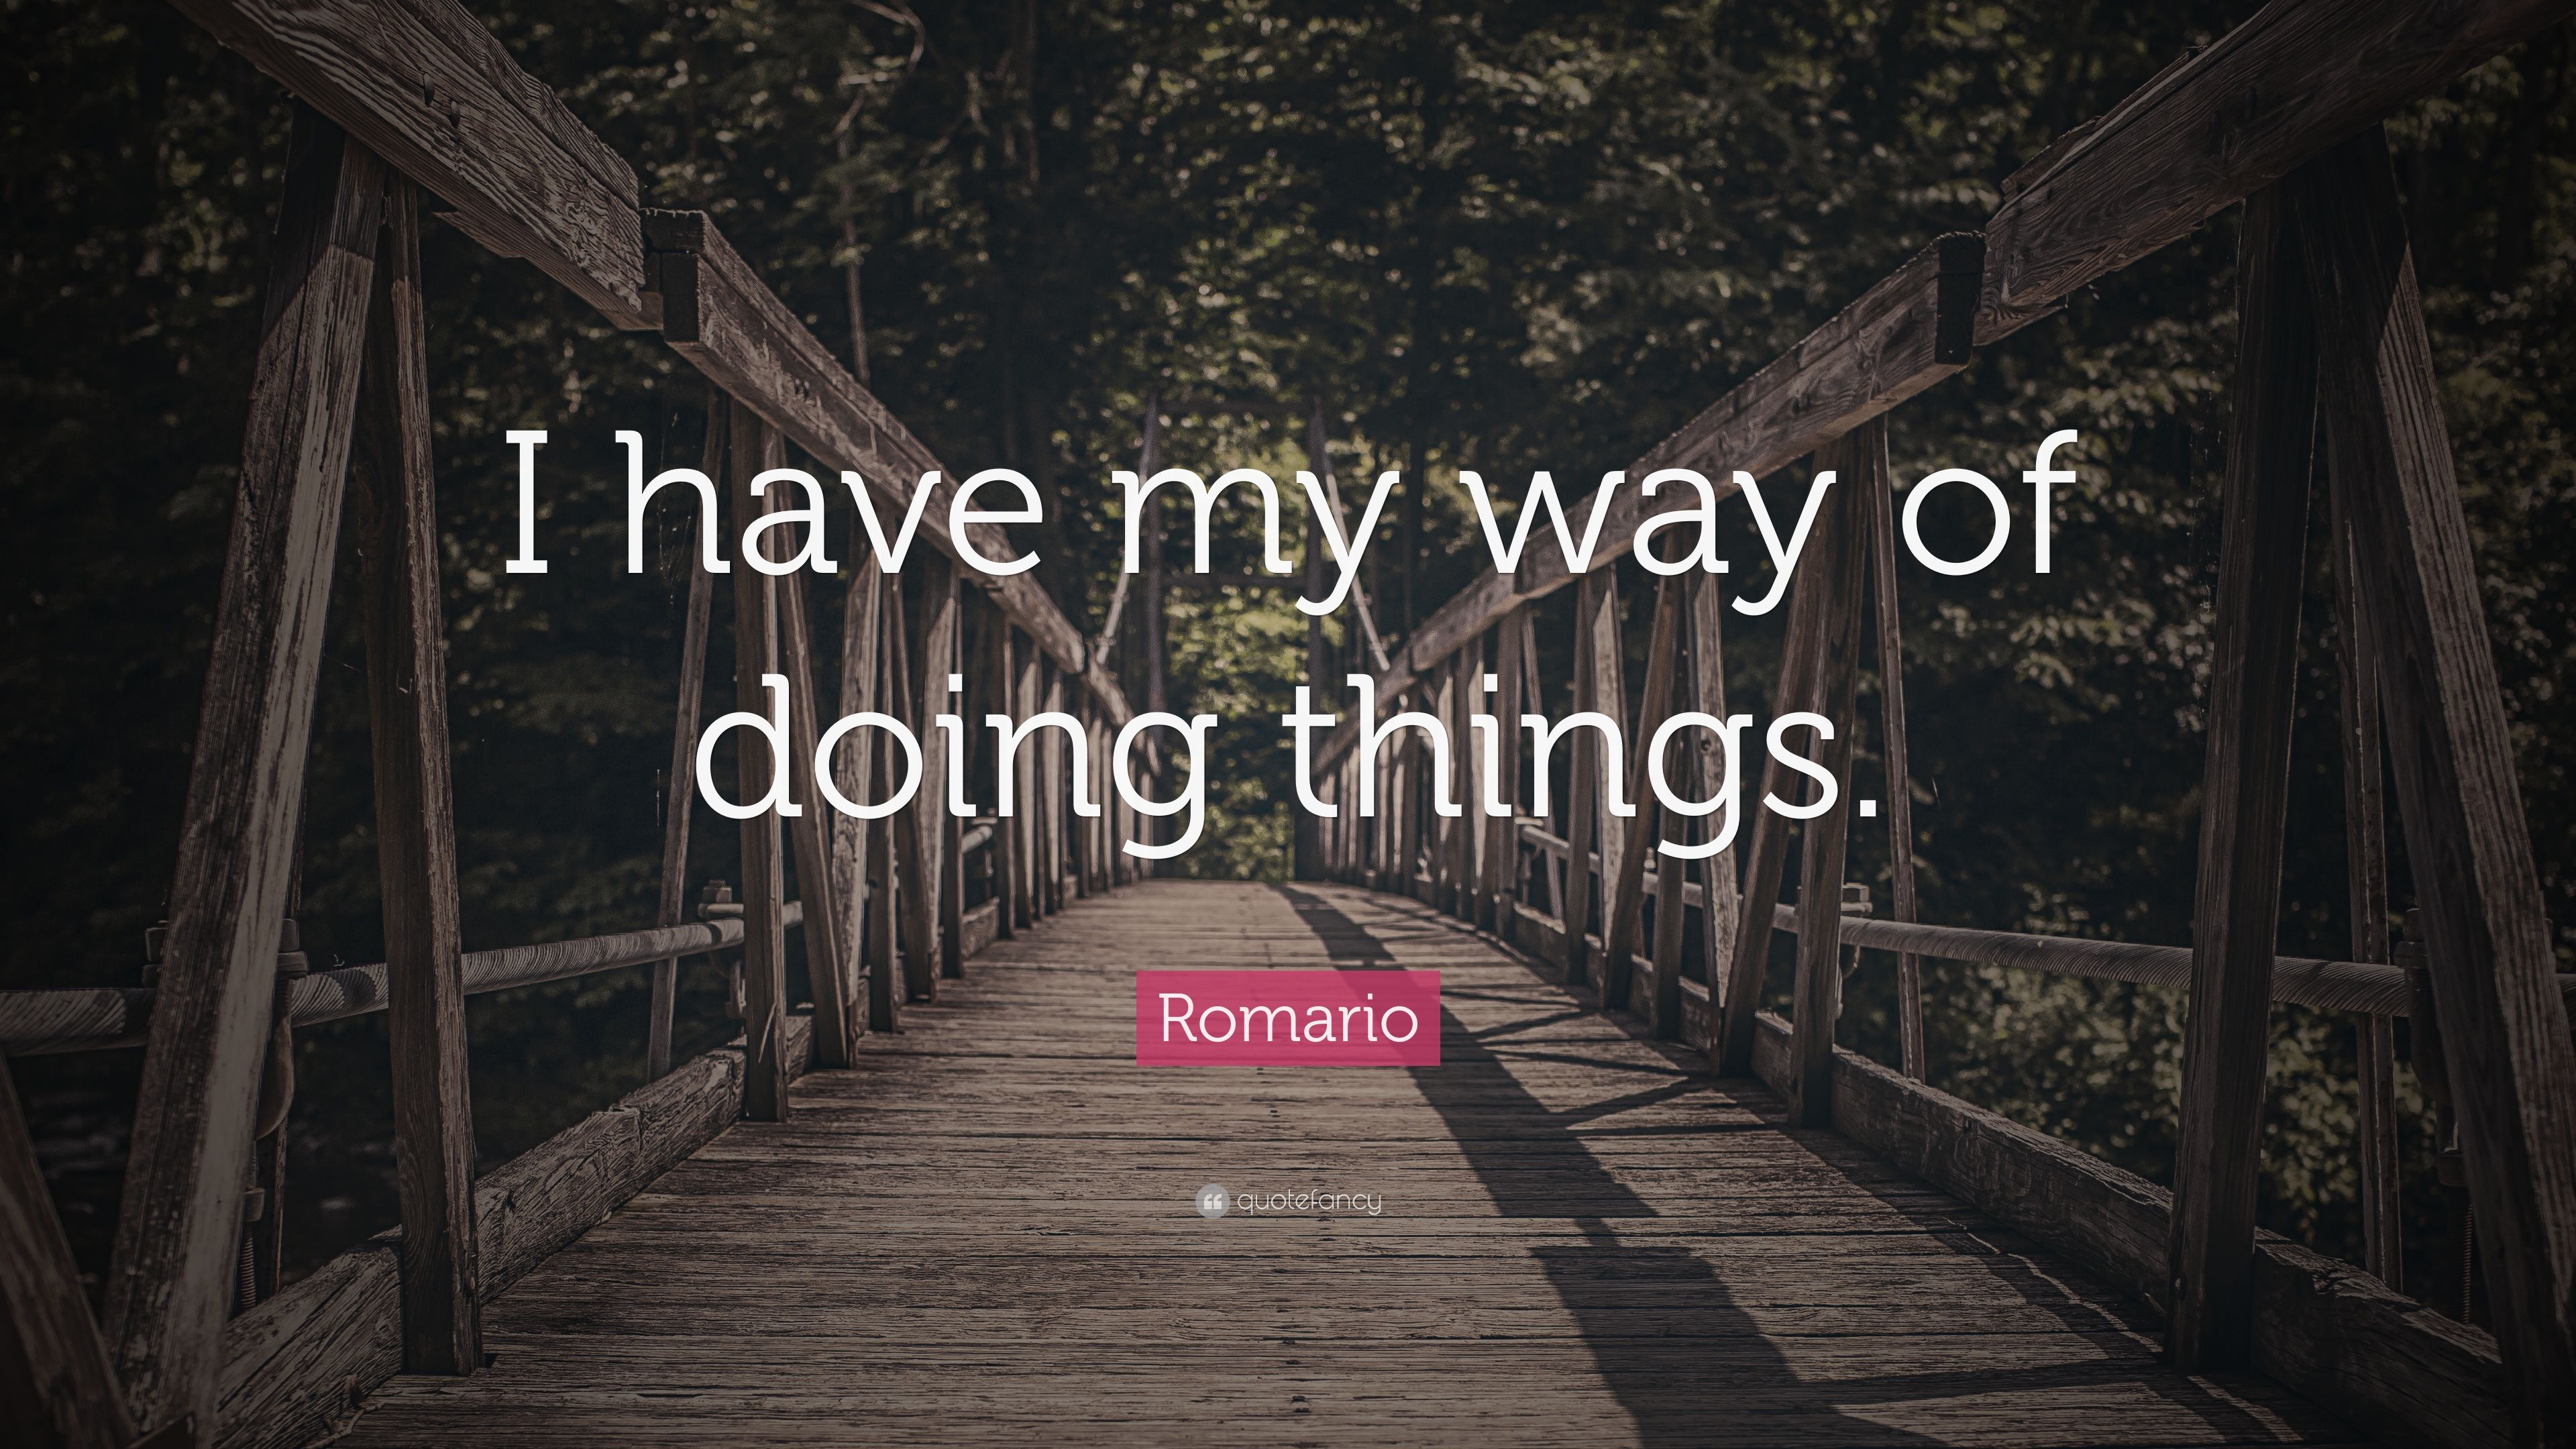 Romario Quote: “I have my way of doing things.” 7 wallpaper